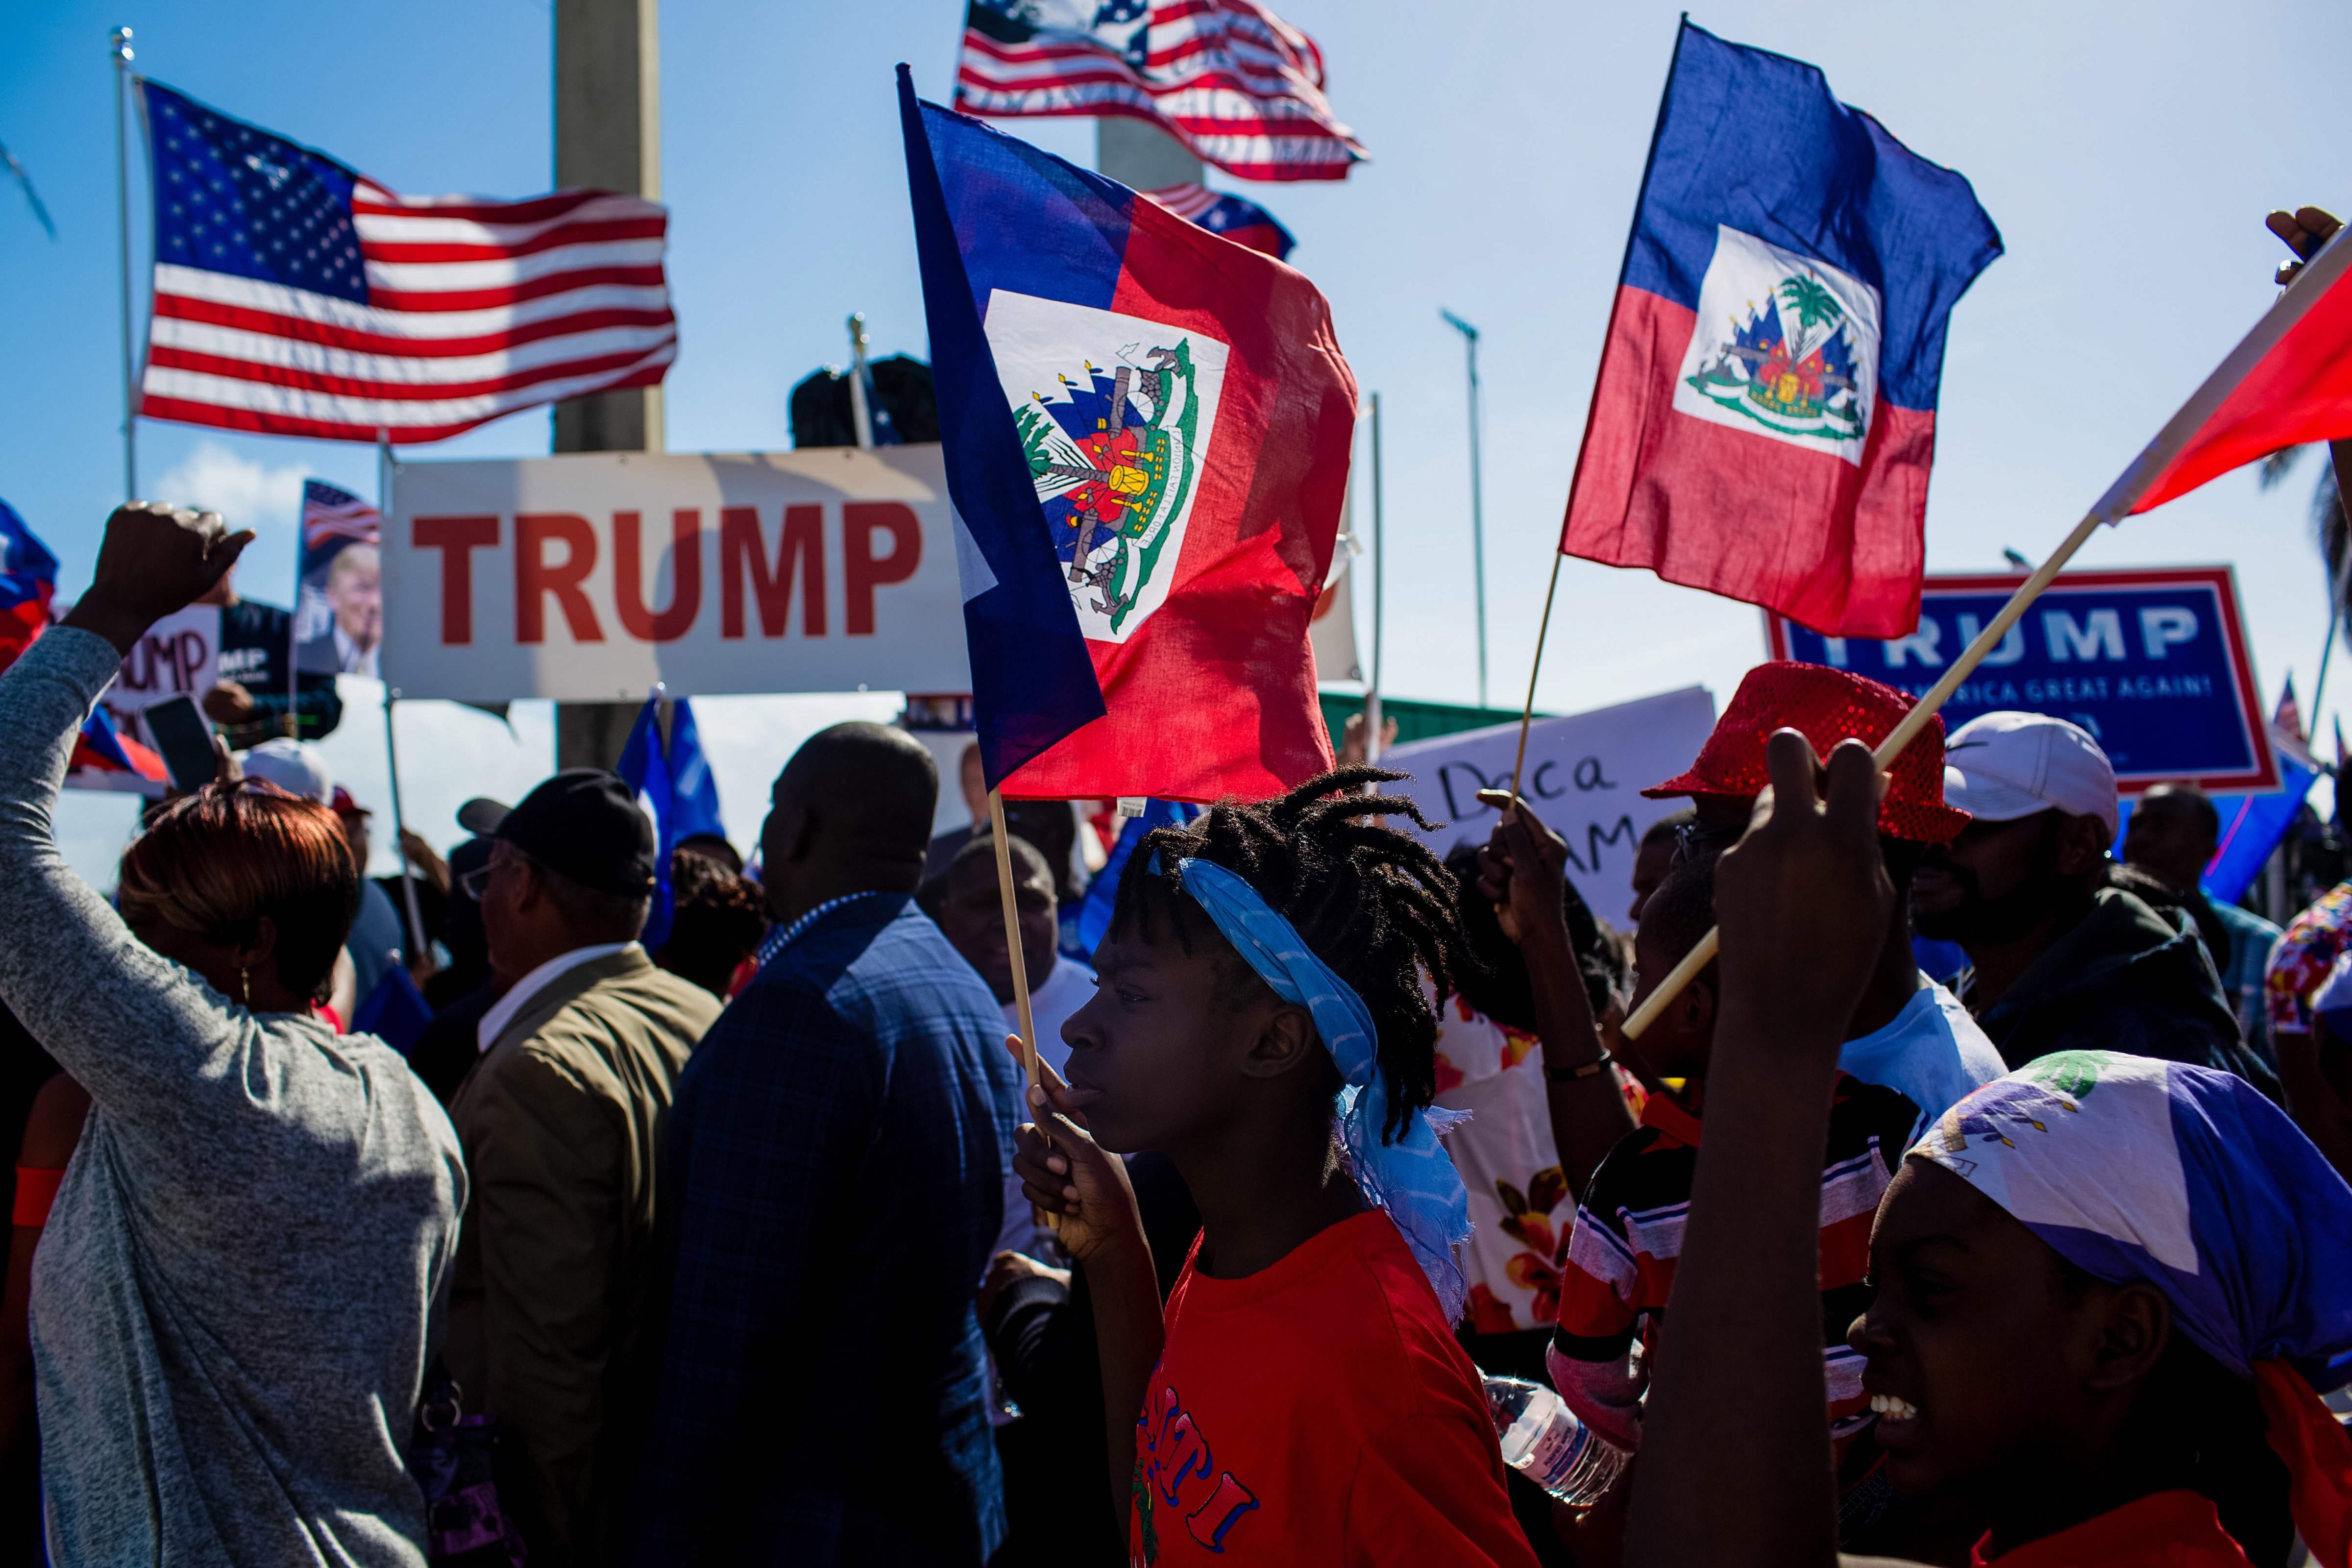 Demonstrators hold Haitian and American flags during a protest against U.S. President Donald Trump. (Bloomberg—Bloomberg via Getty Images)